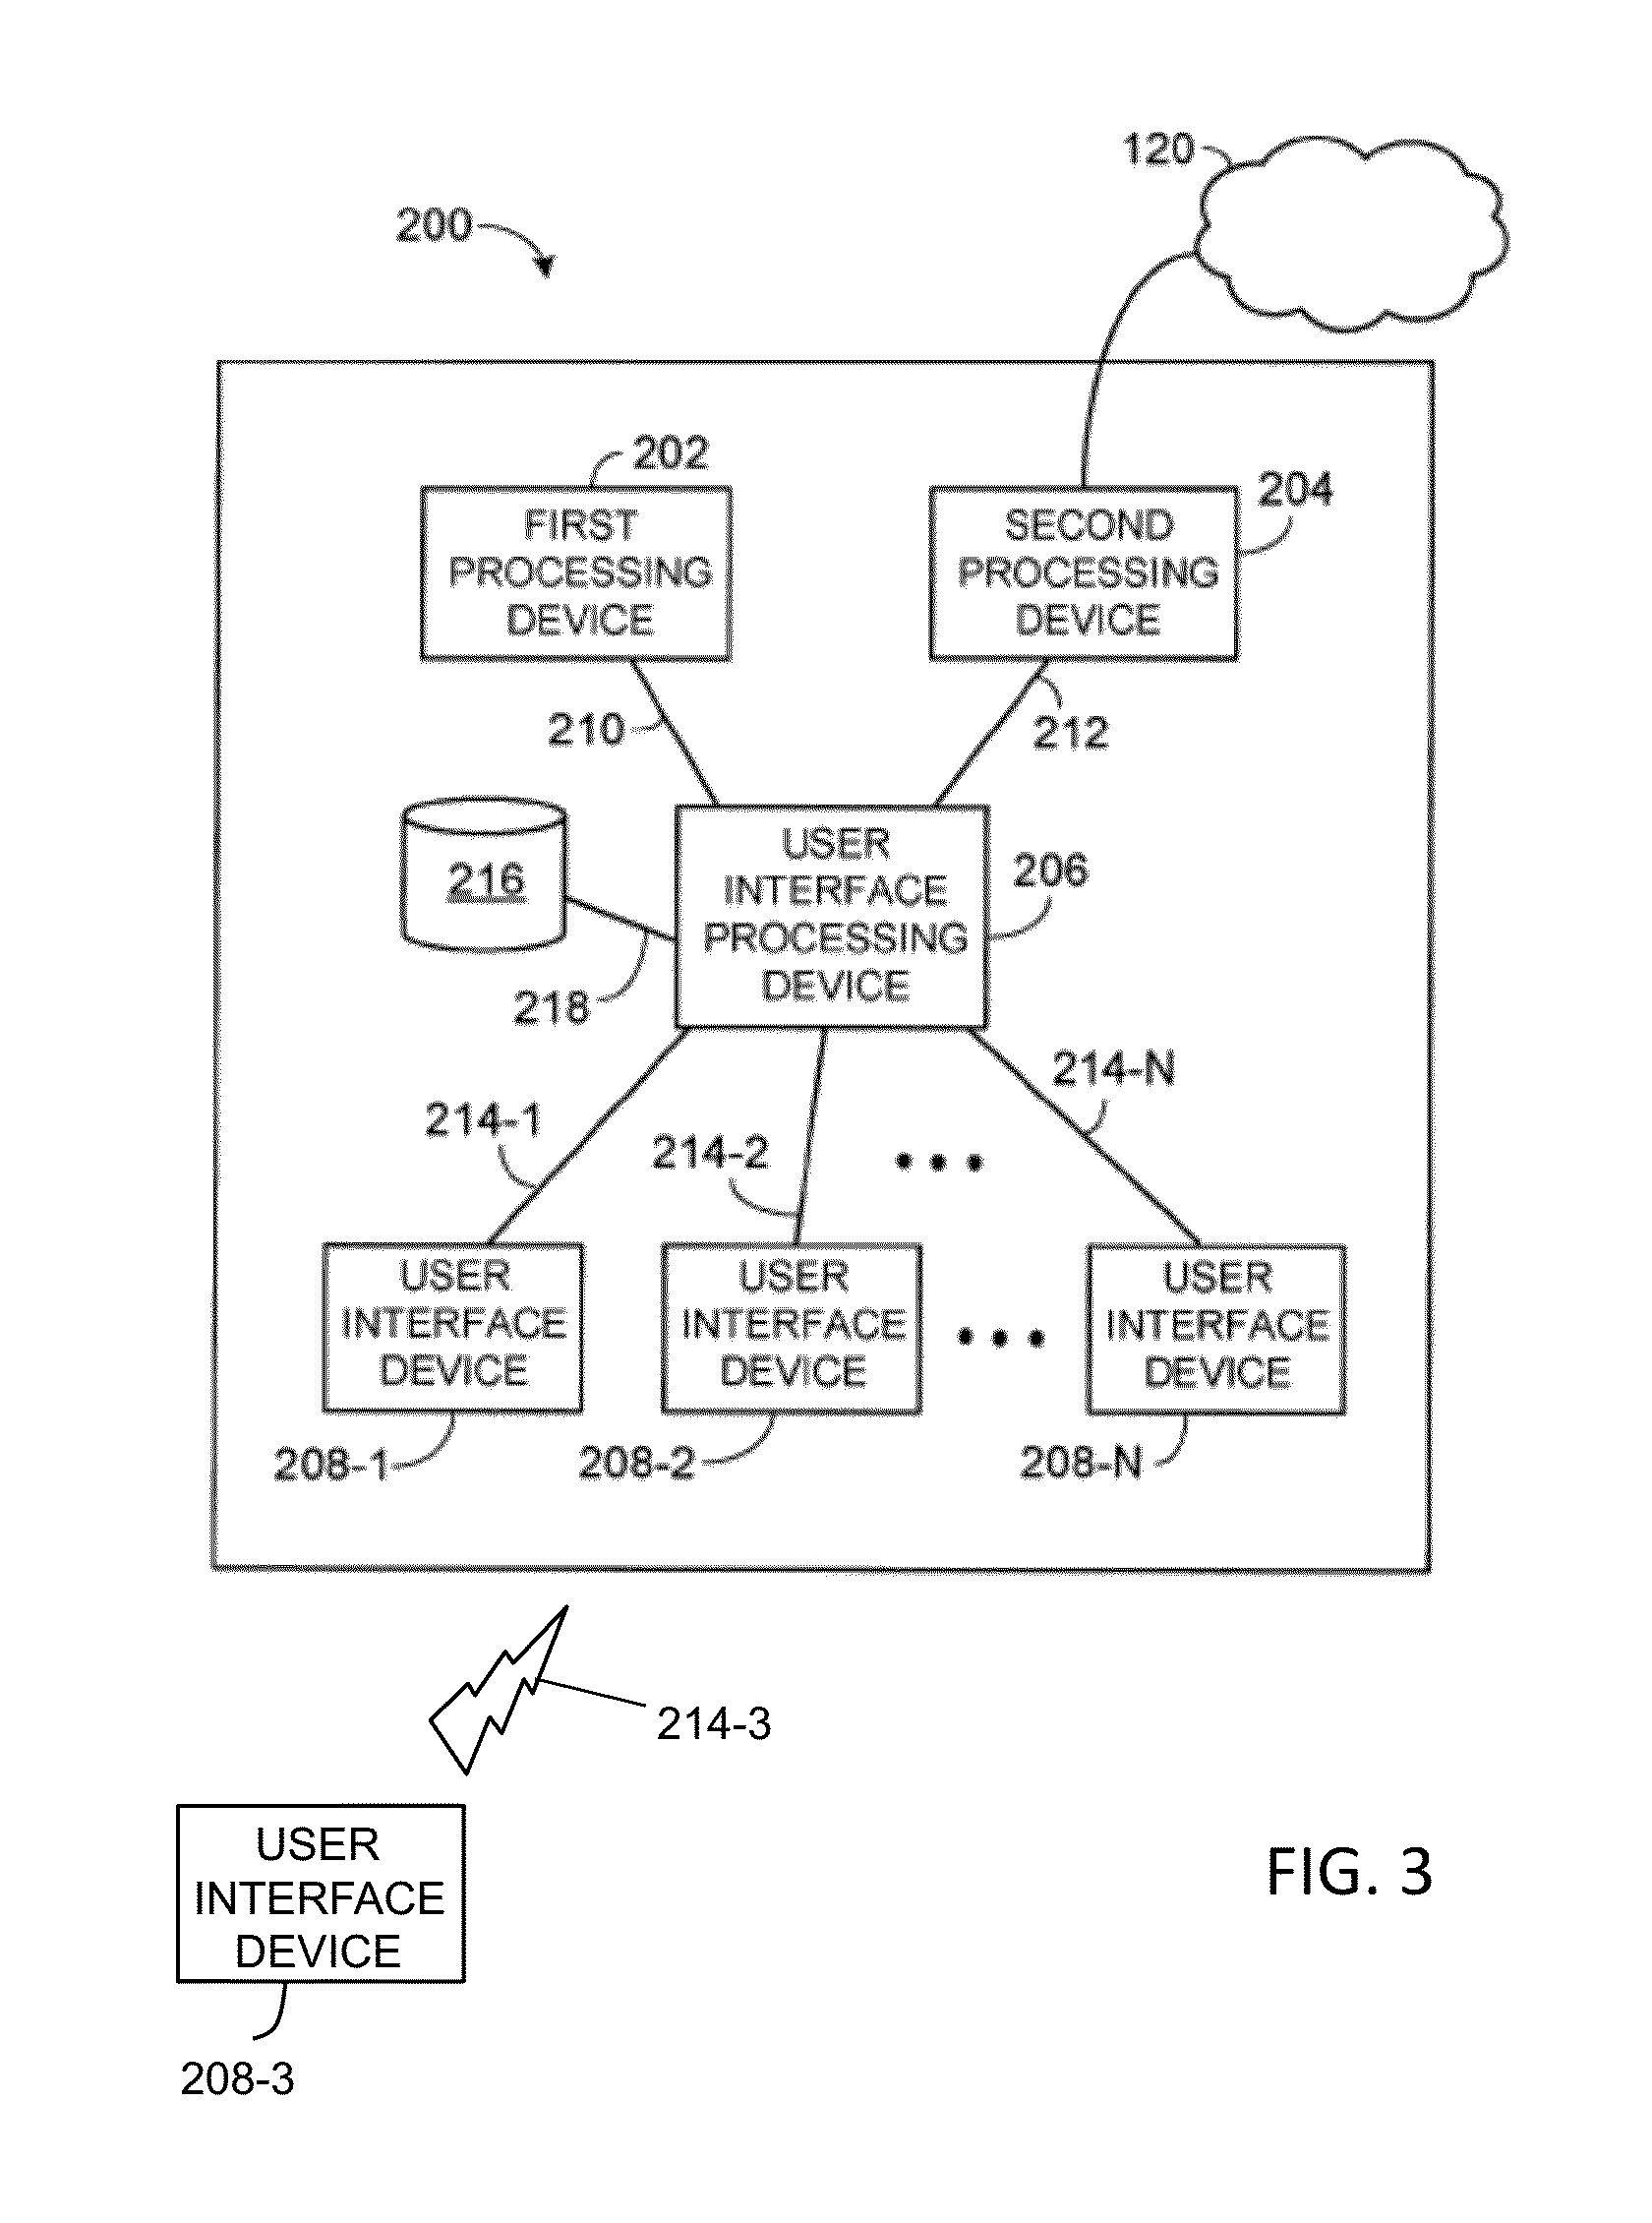 Remote monitoring interface device and mobile application for medical devices